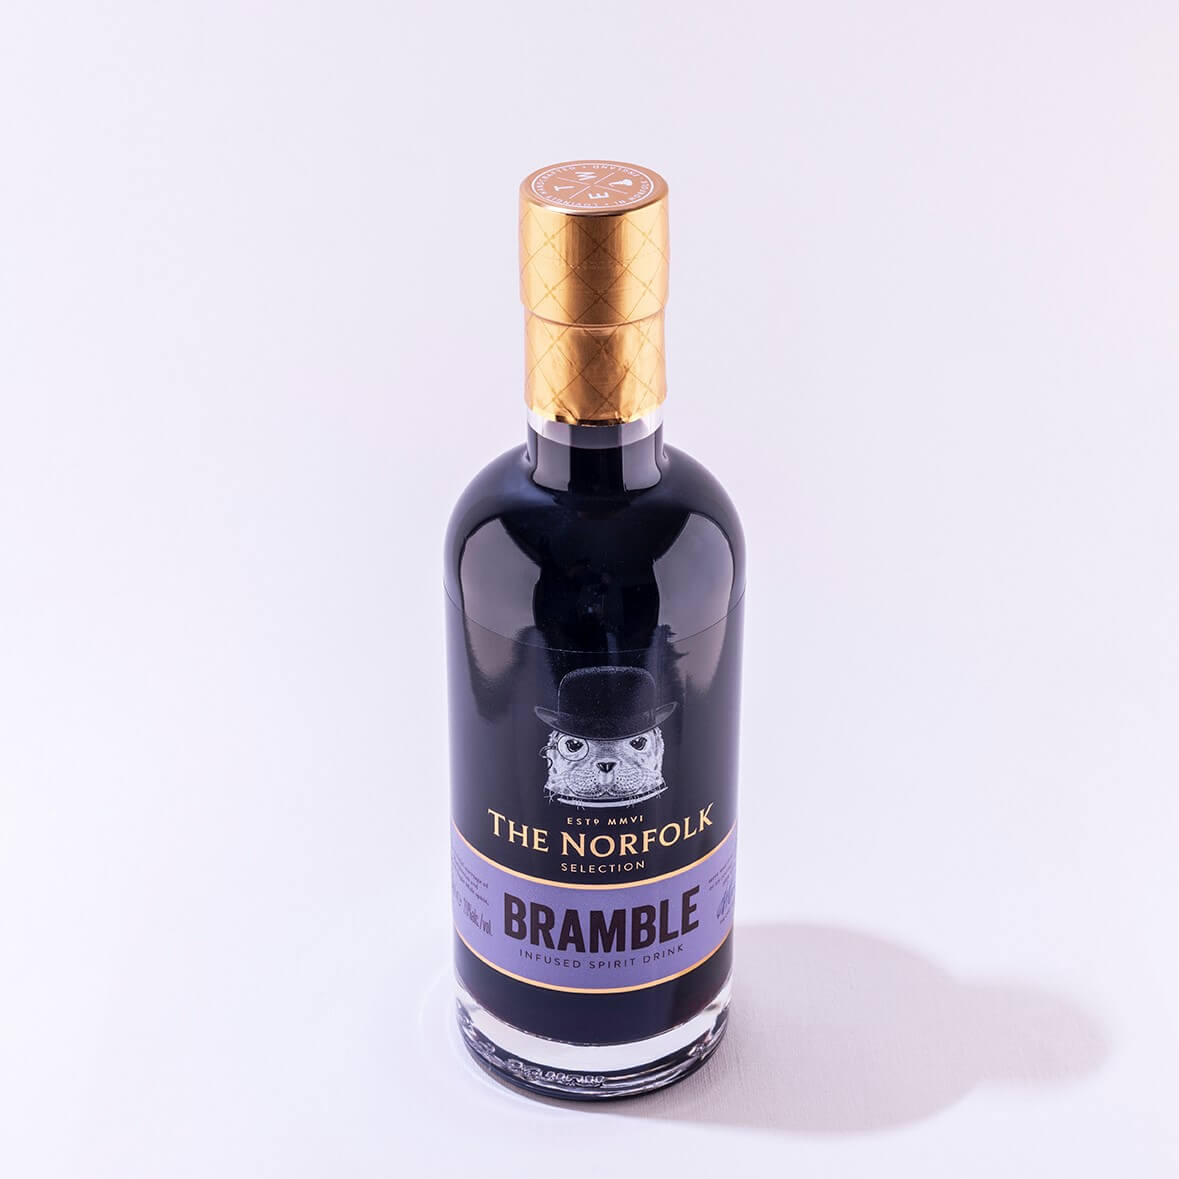 Image of Fruit Liqueur by The English Whisky Company, designed, produced or made in the UK. Buying this product supports a UK business, jobs and the local community.